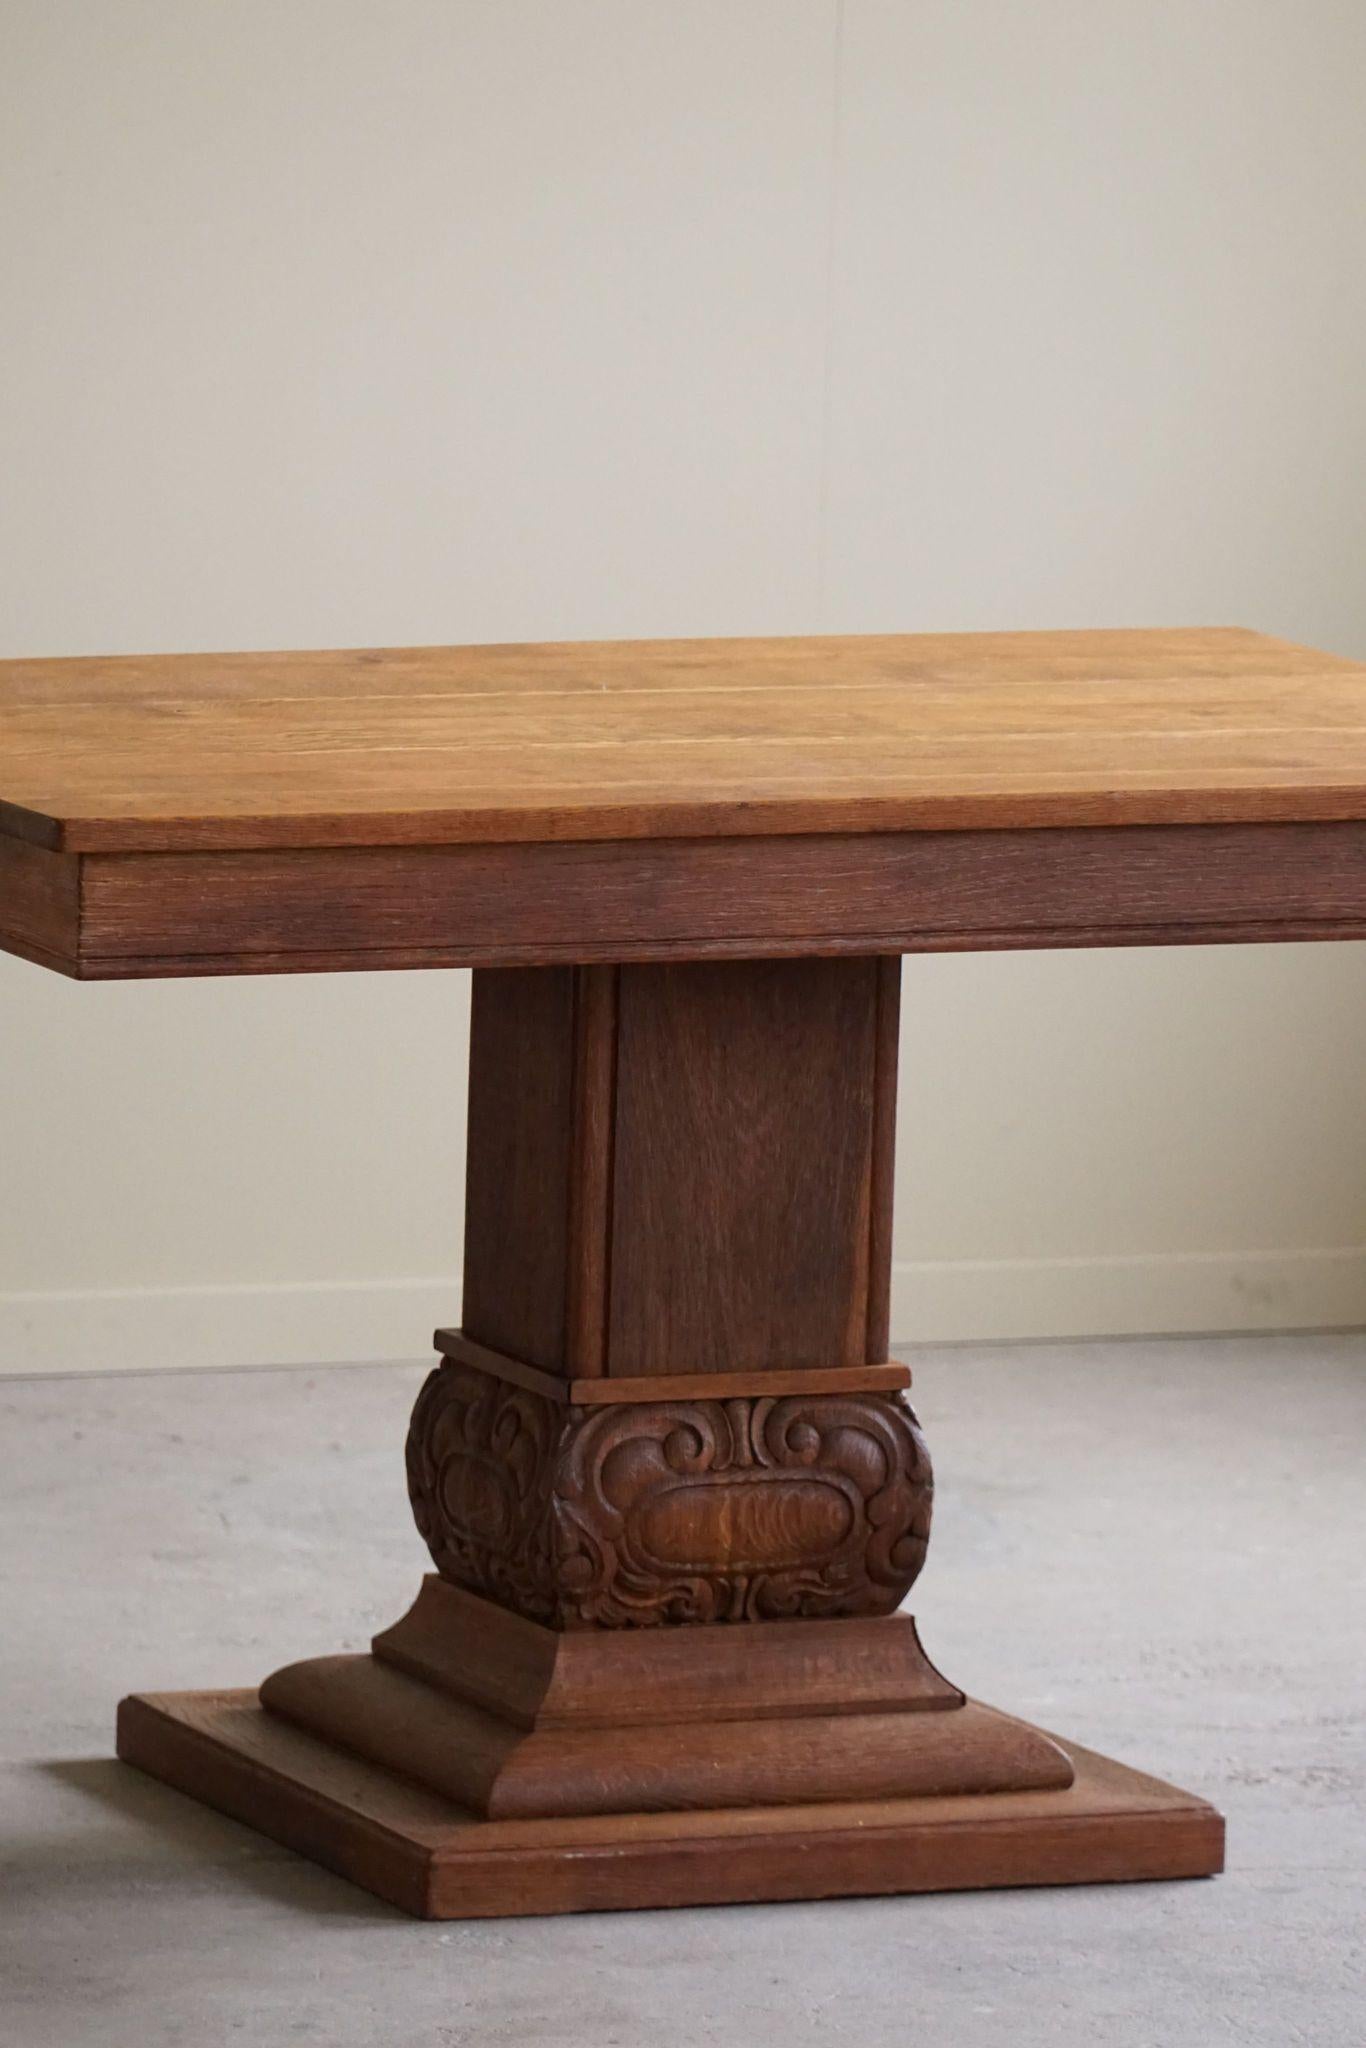 Danish Art Nouveau, Dining / Desk Table made in Oak, Early 20th Century For Sale 2